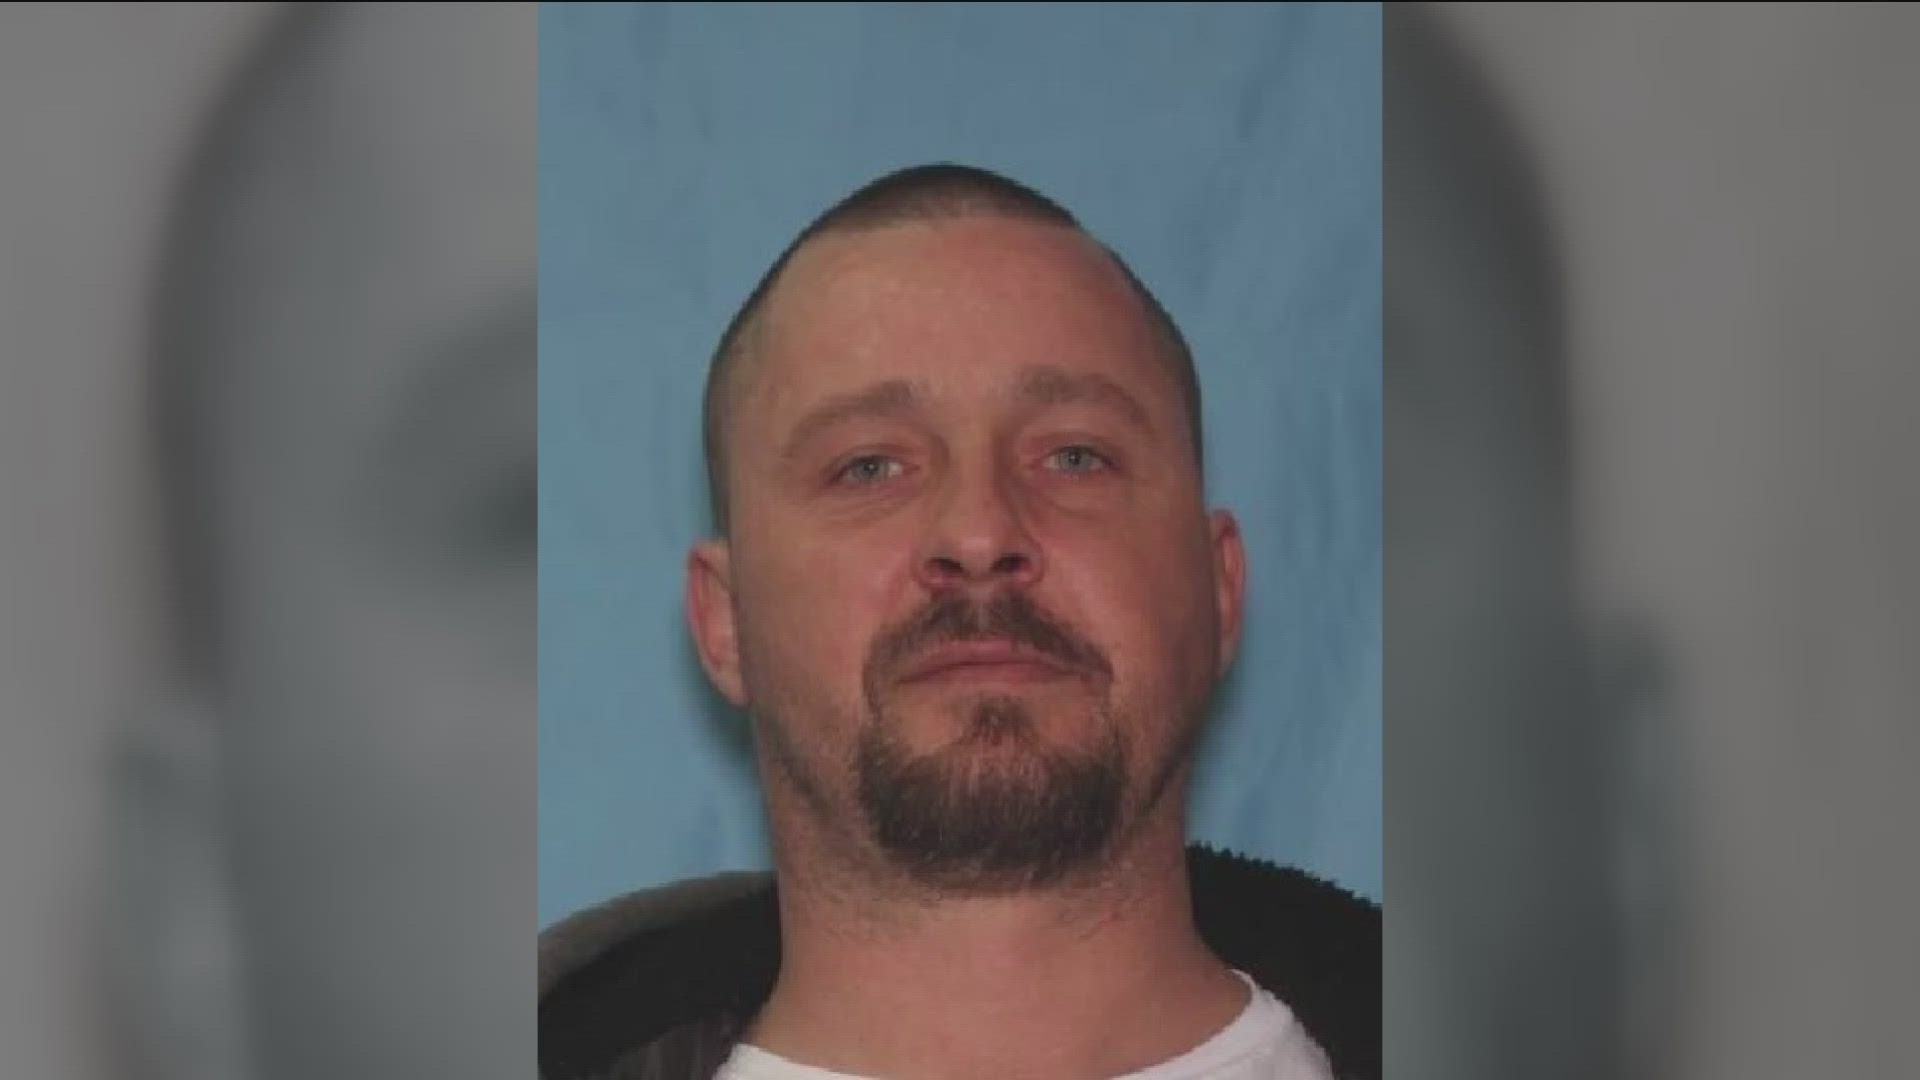 The Custer County Sheriff's Office said Steven Pierson may be traveling to family or friends in eastern Washington, Montana or Missouri.